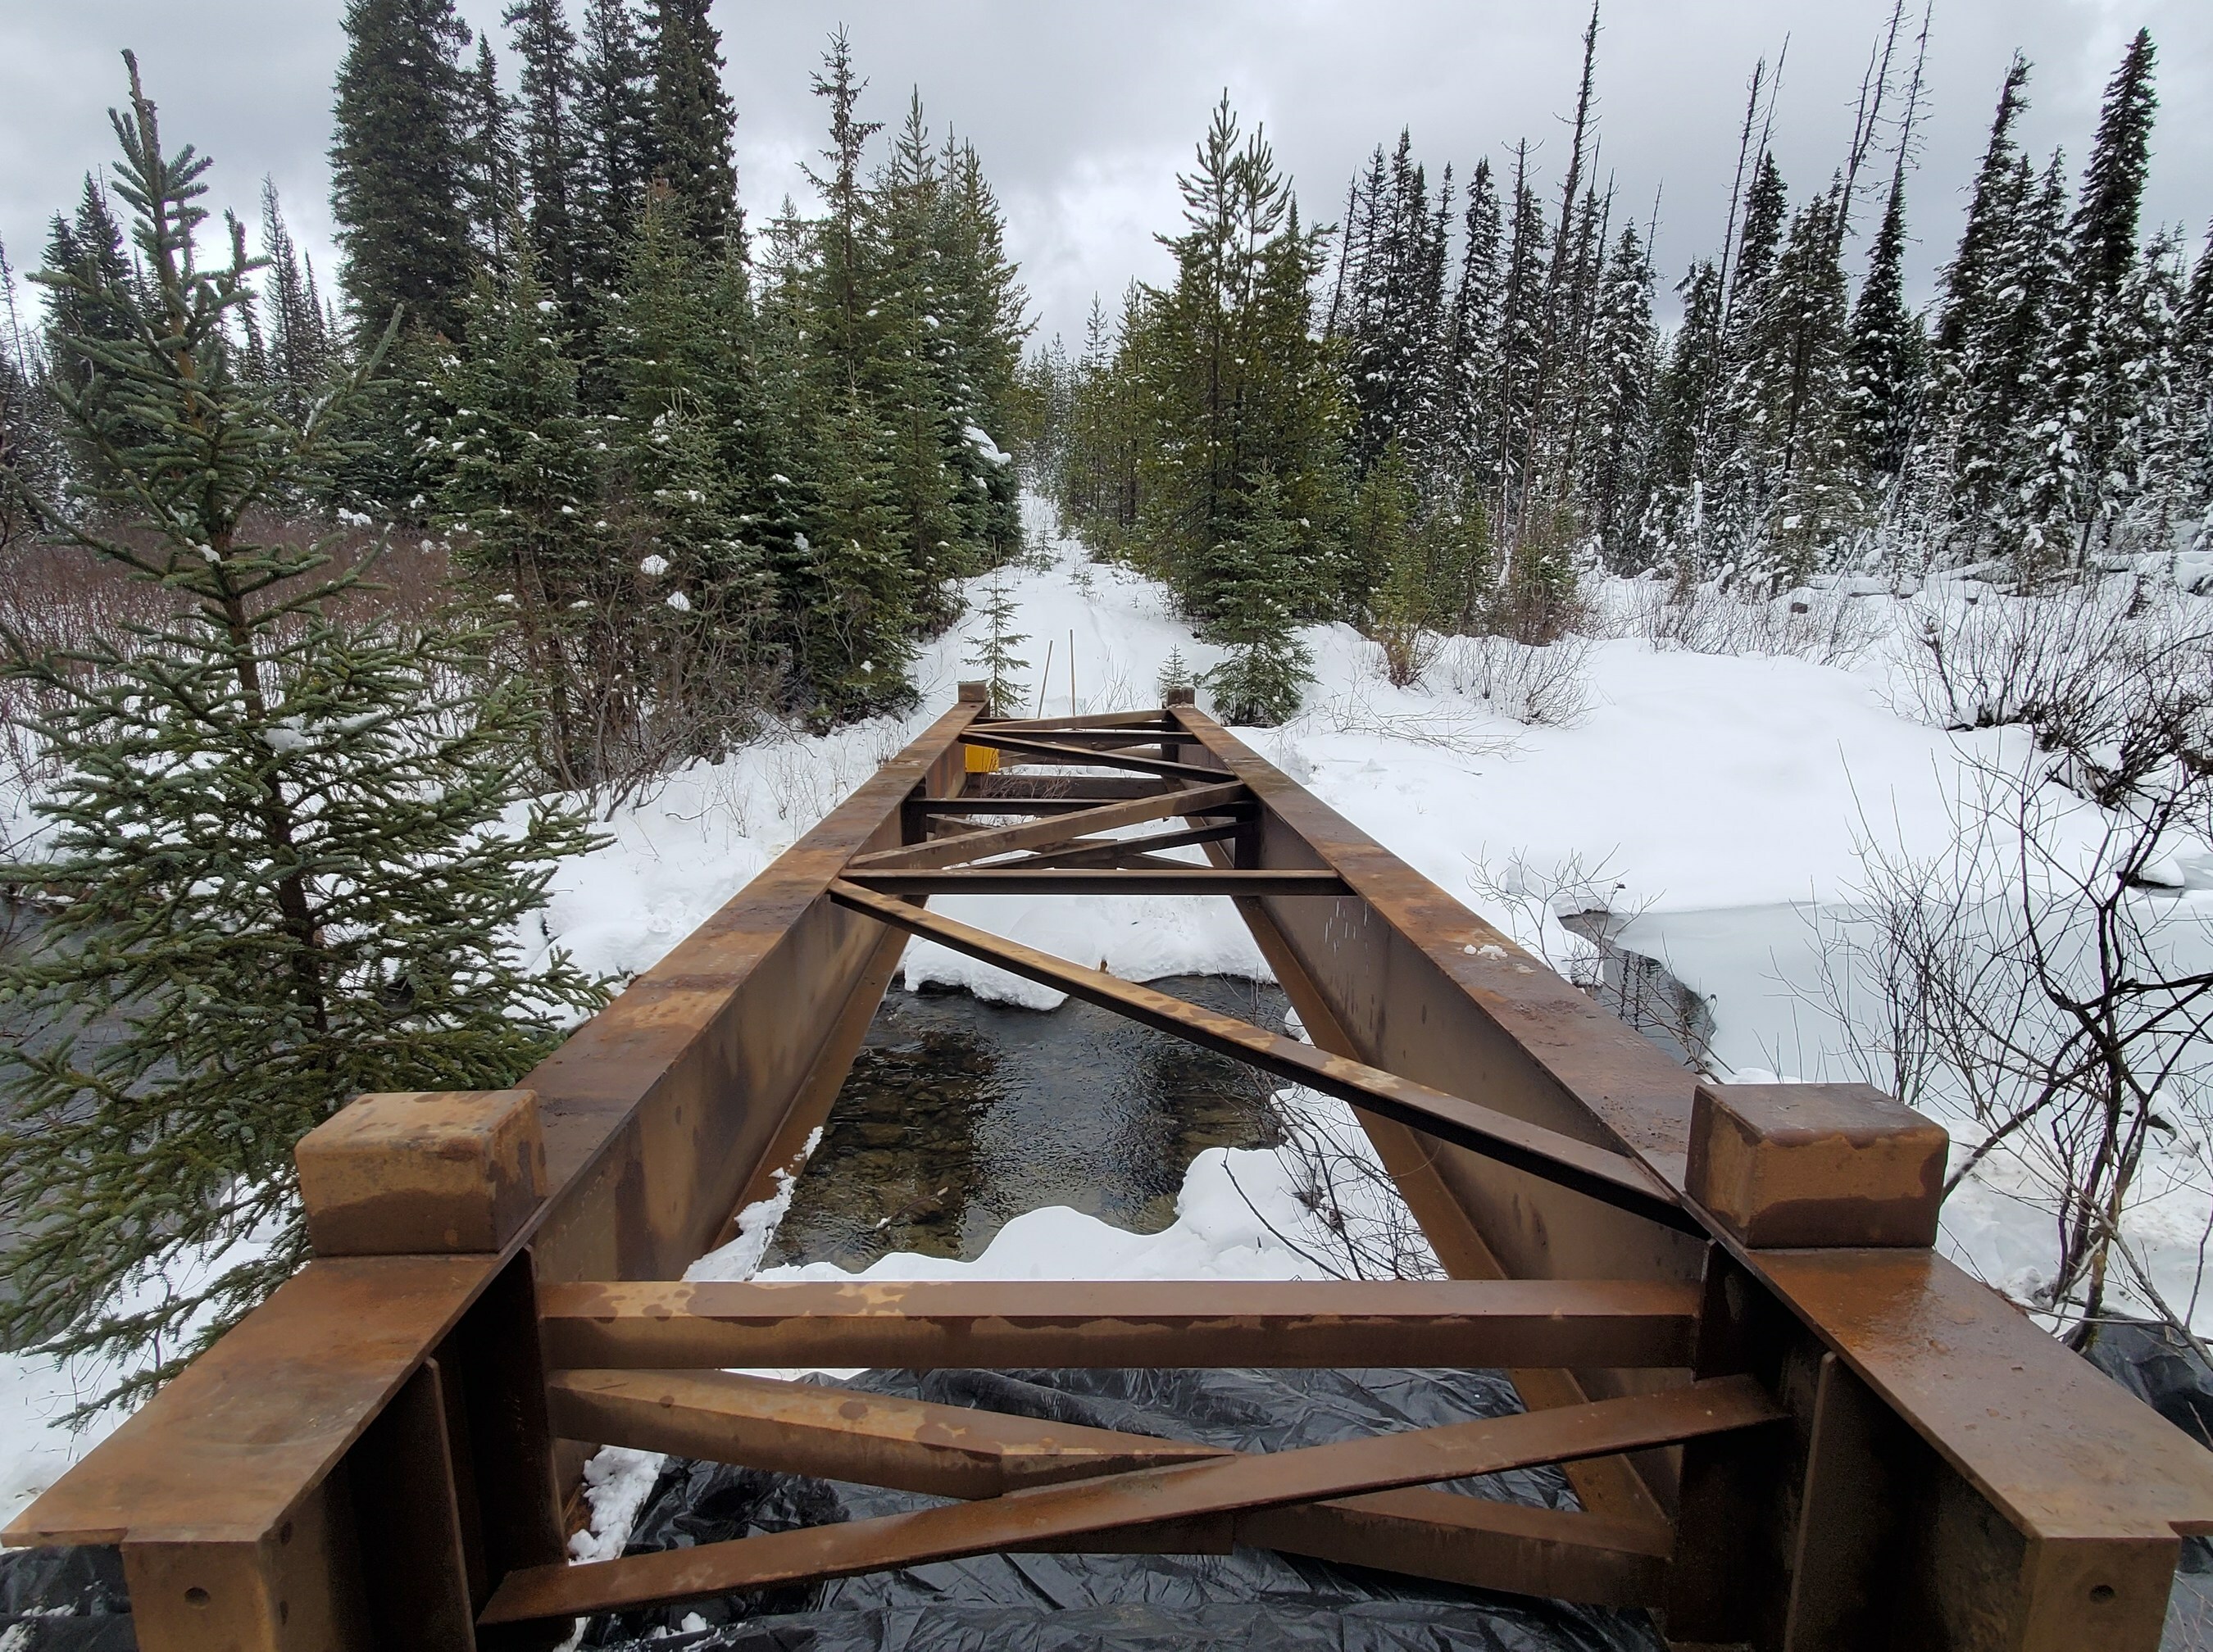 Image 2: Temporary Bridge Installation to Access Tailings Study Area (CNW Group/Defense Metals Corp.)